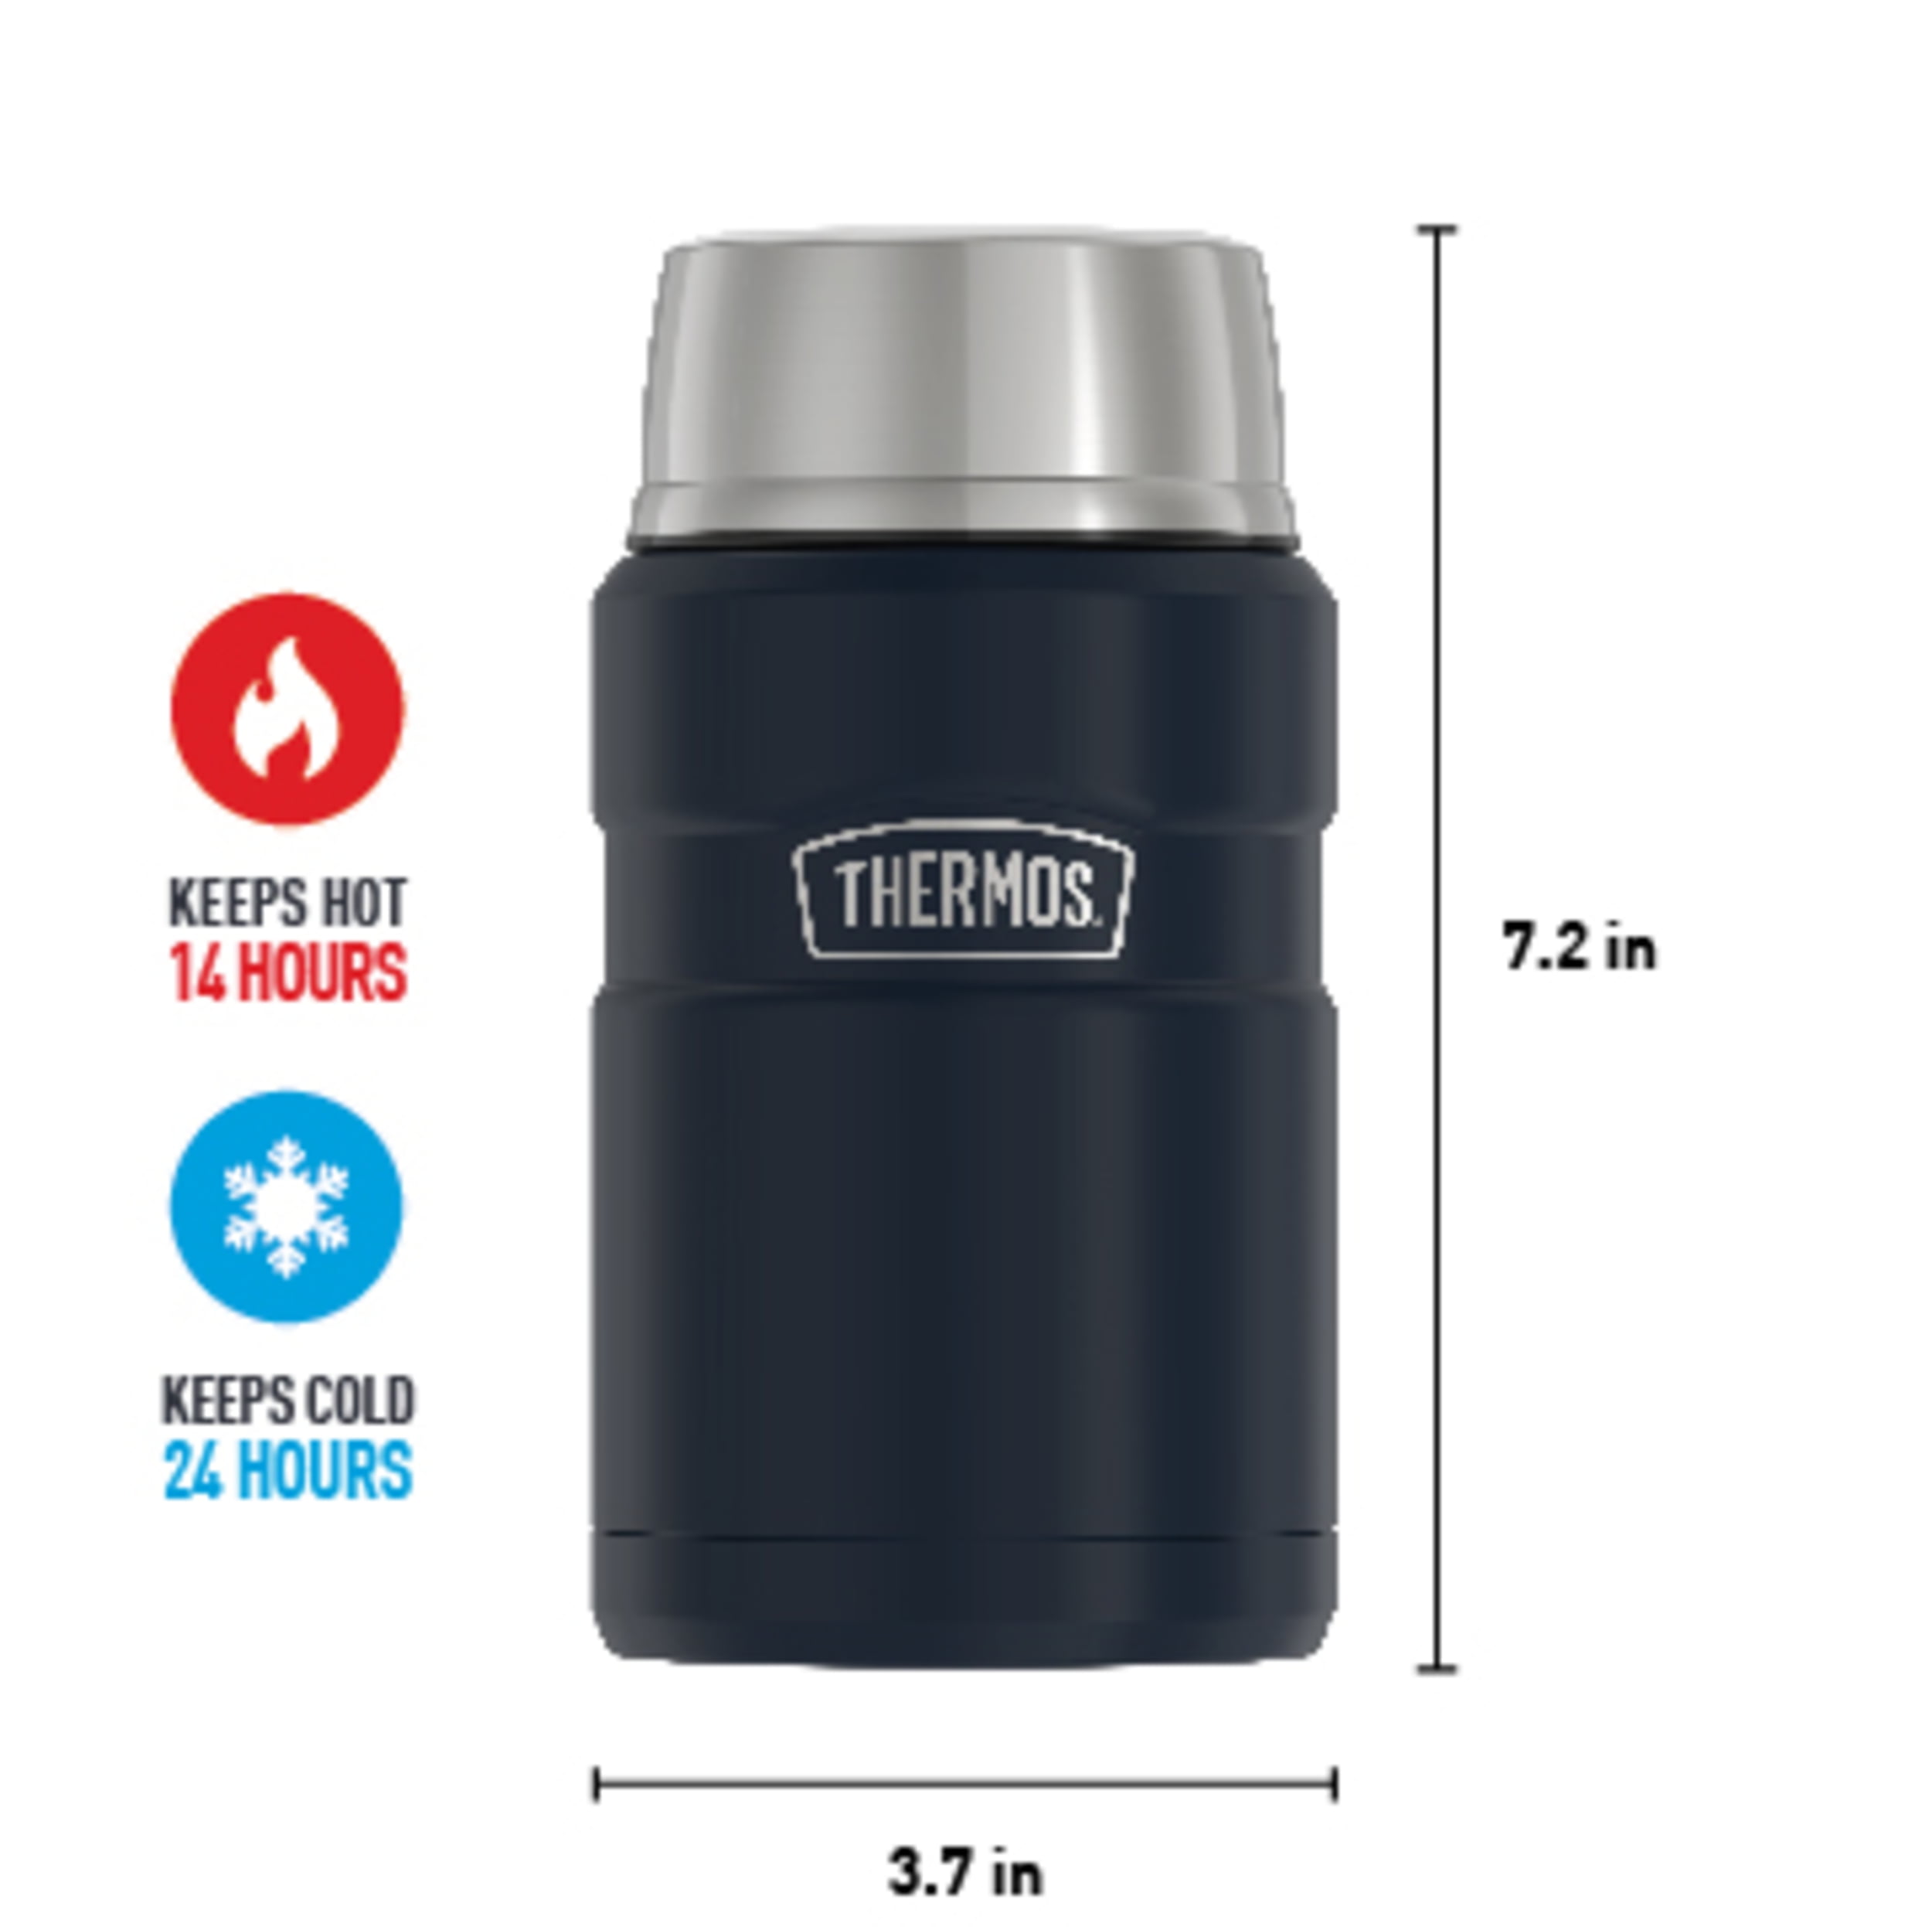 Thermos Stainless 24-Ounce Food Jar $19